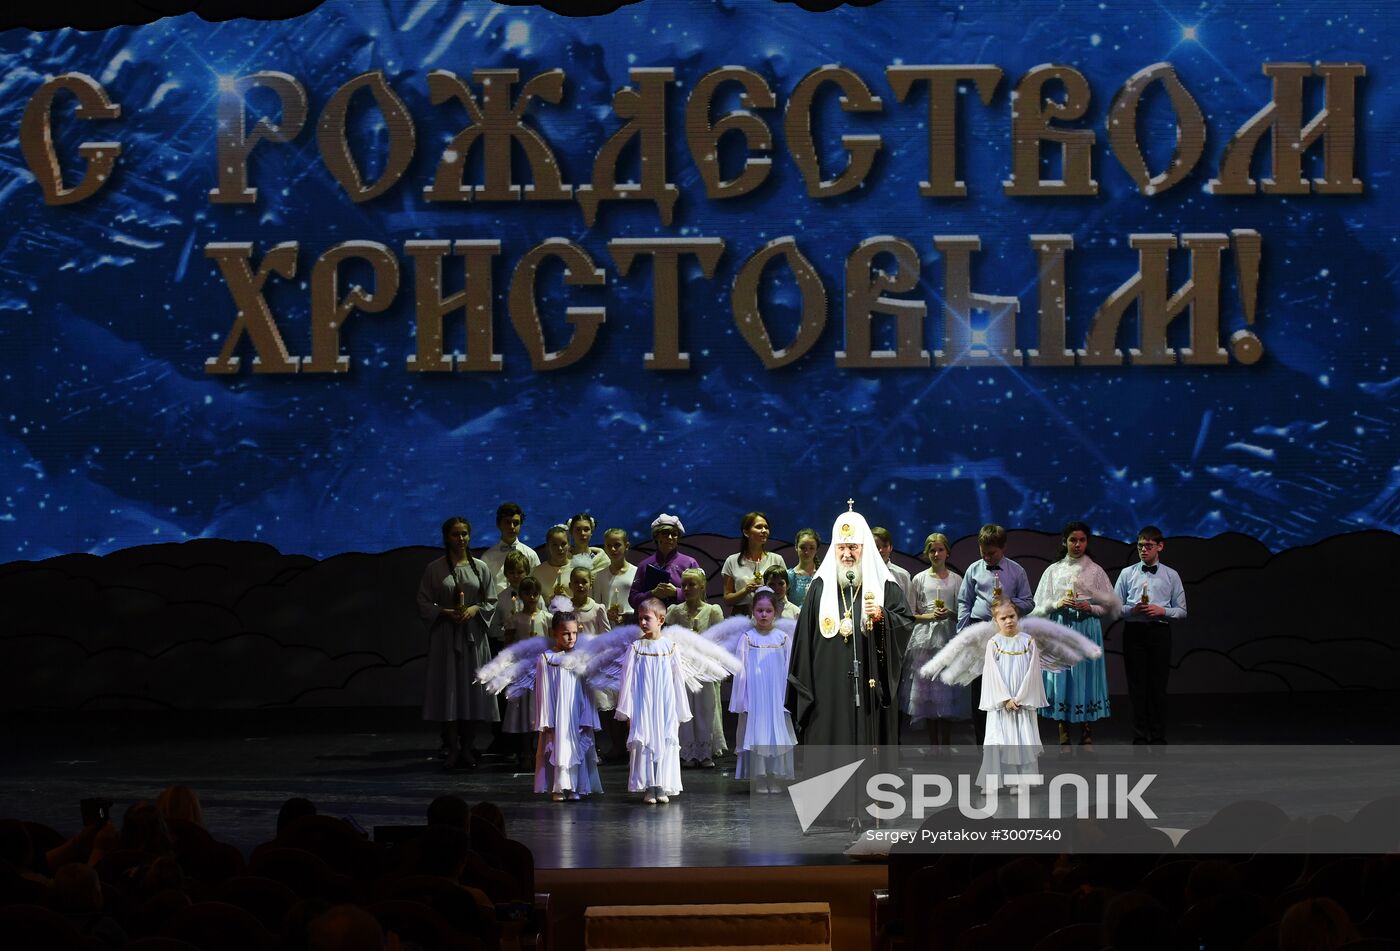 Patriarch's Christmas celebrations at Christ the Savior Cathedral